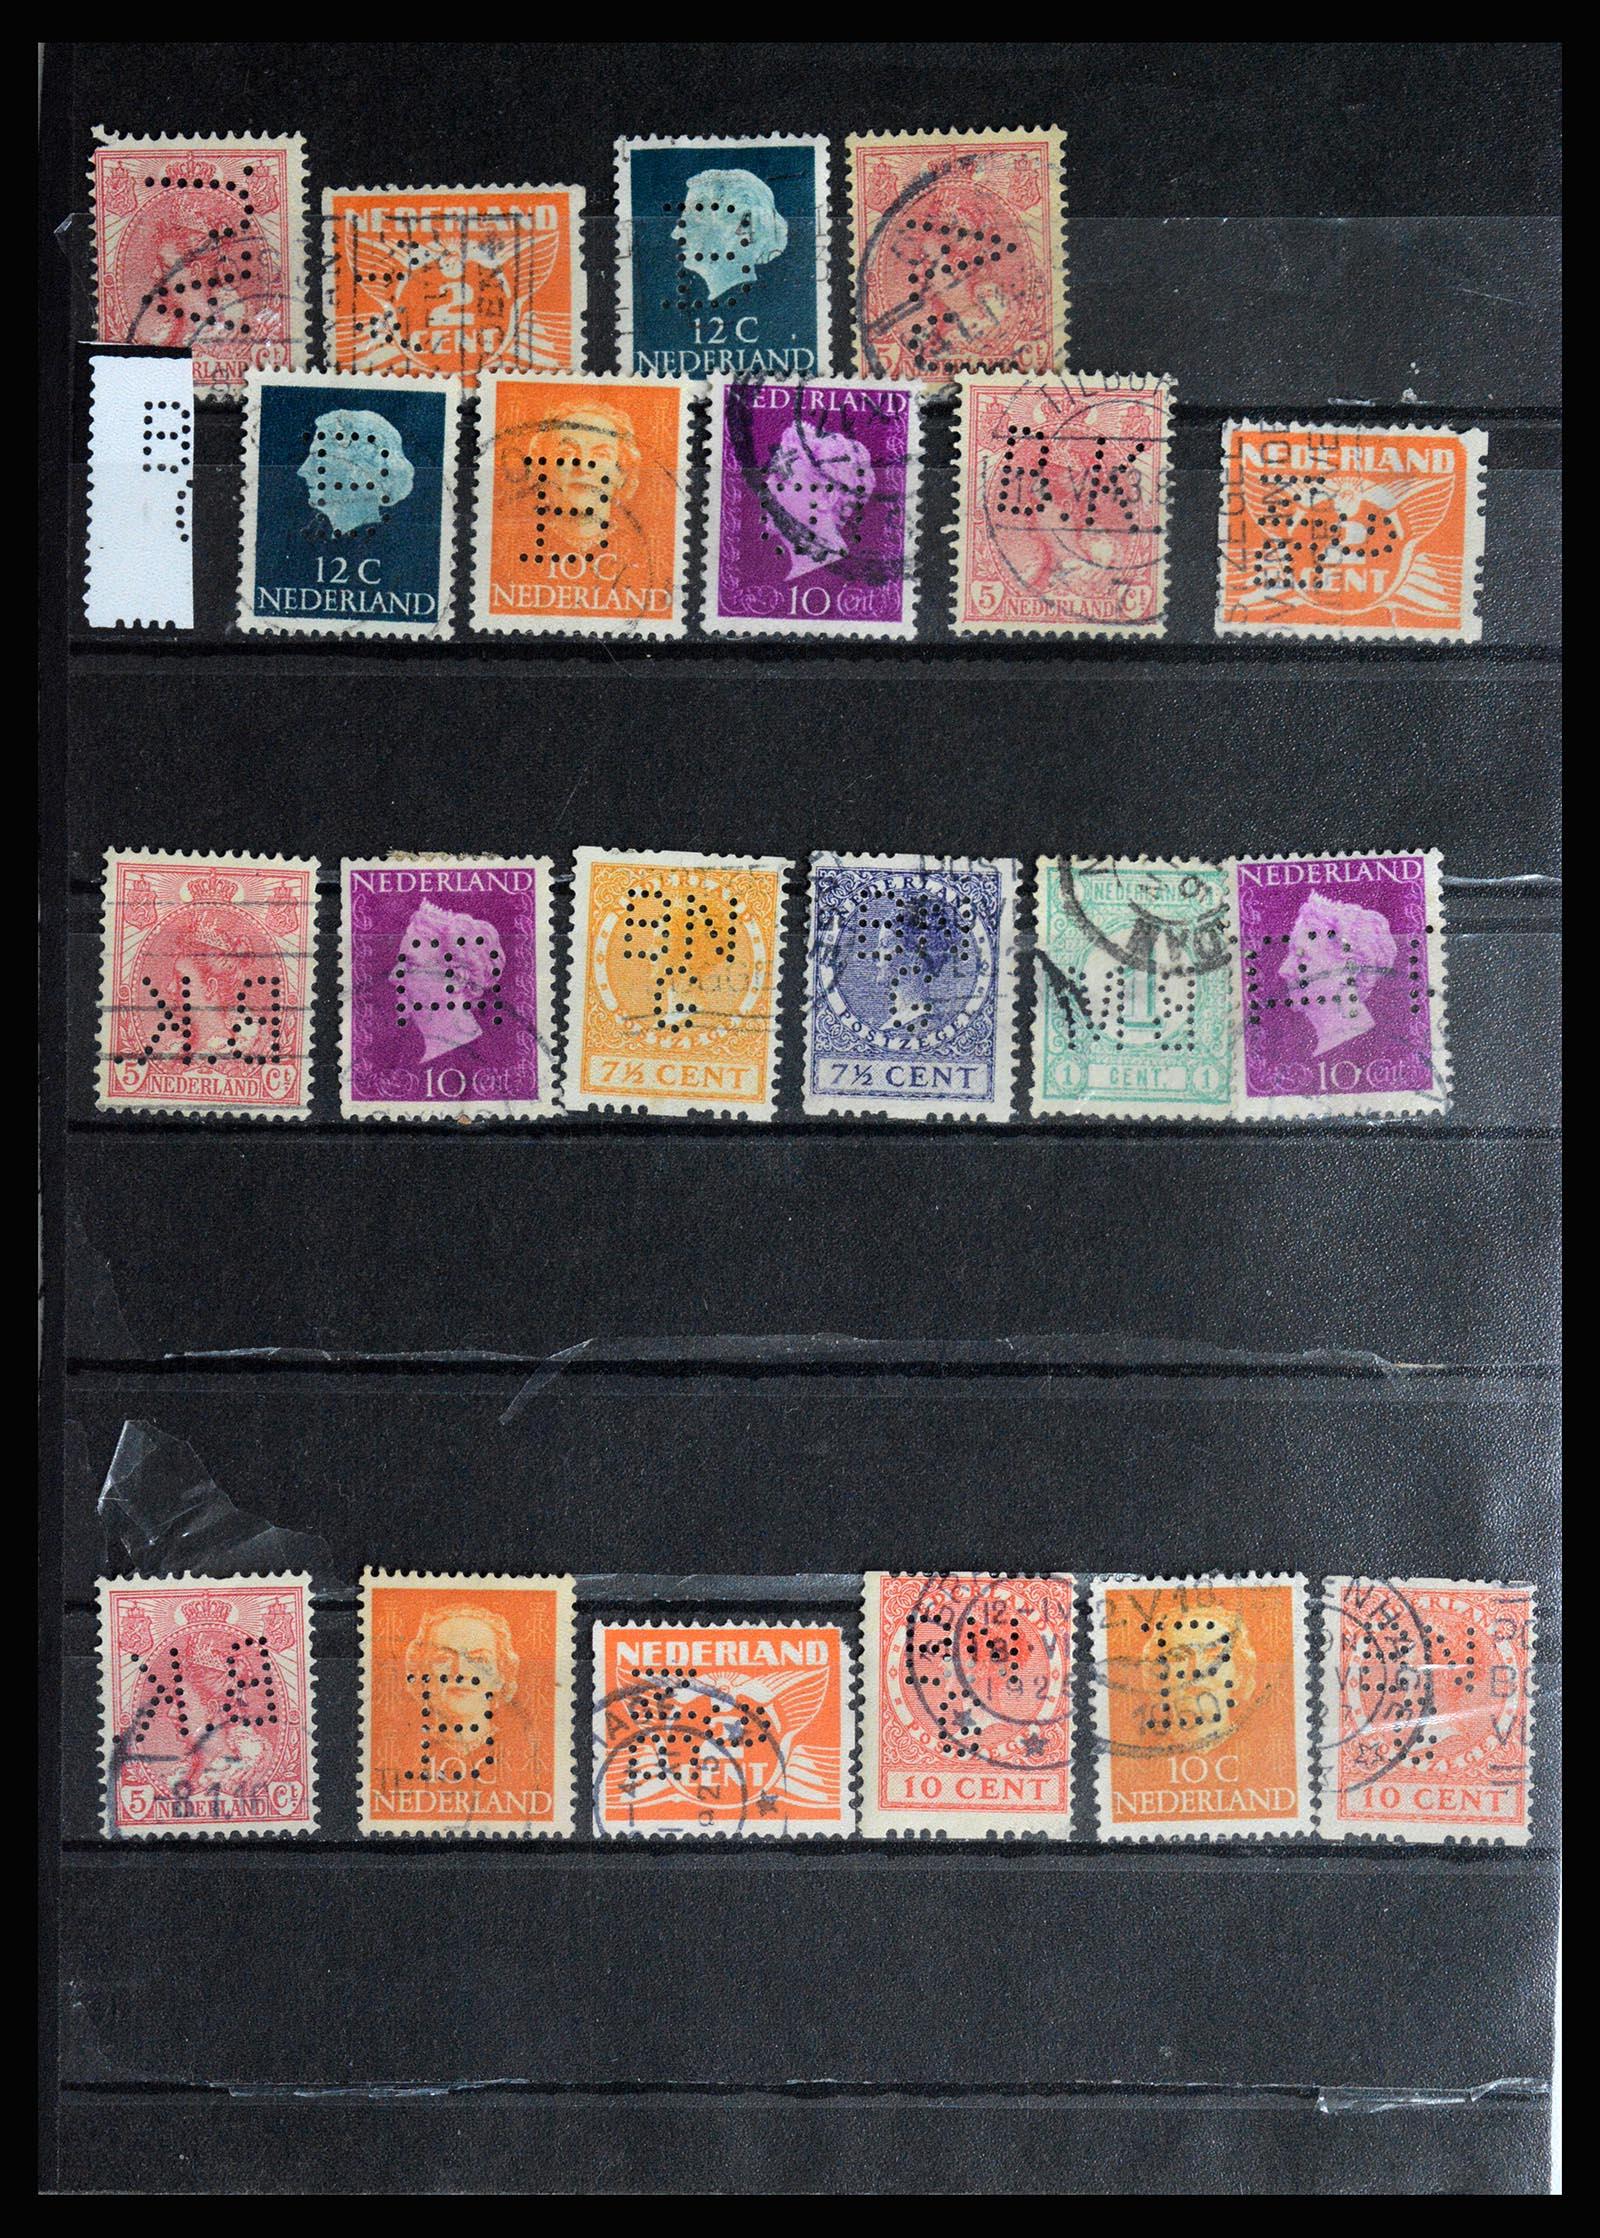 36849 002 - Stamp collection 36849 Netherlands perfins 1891-1960.